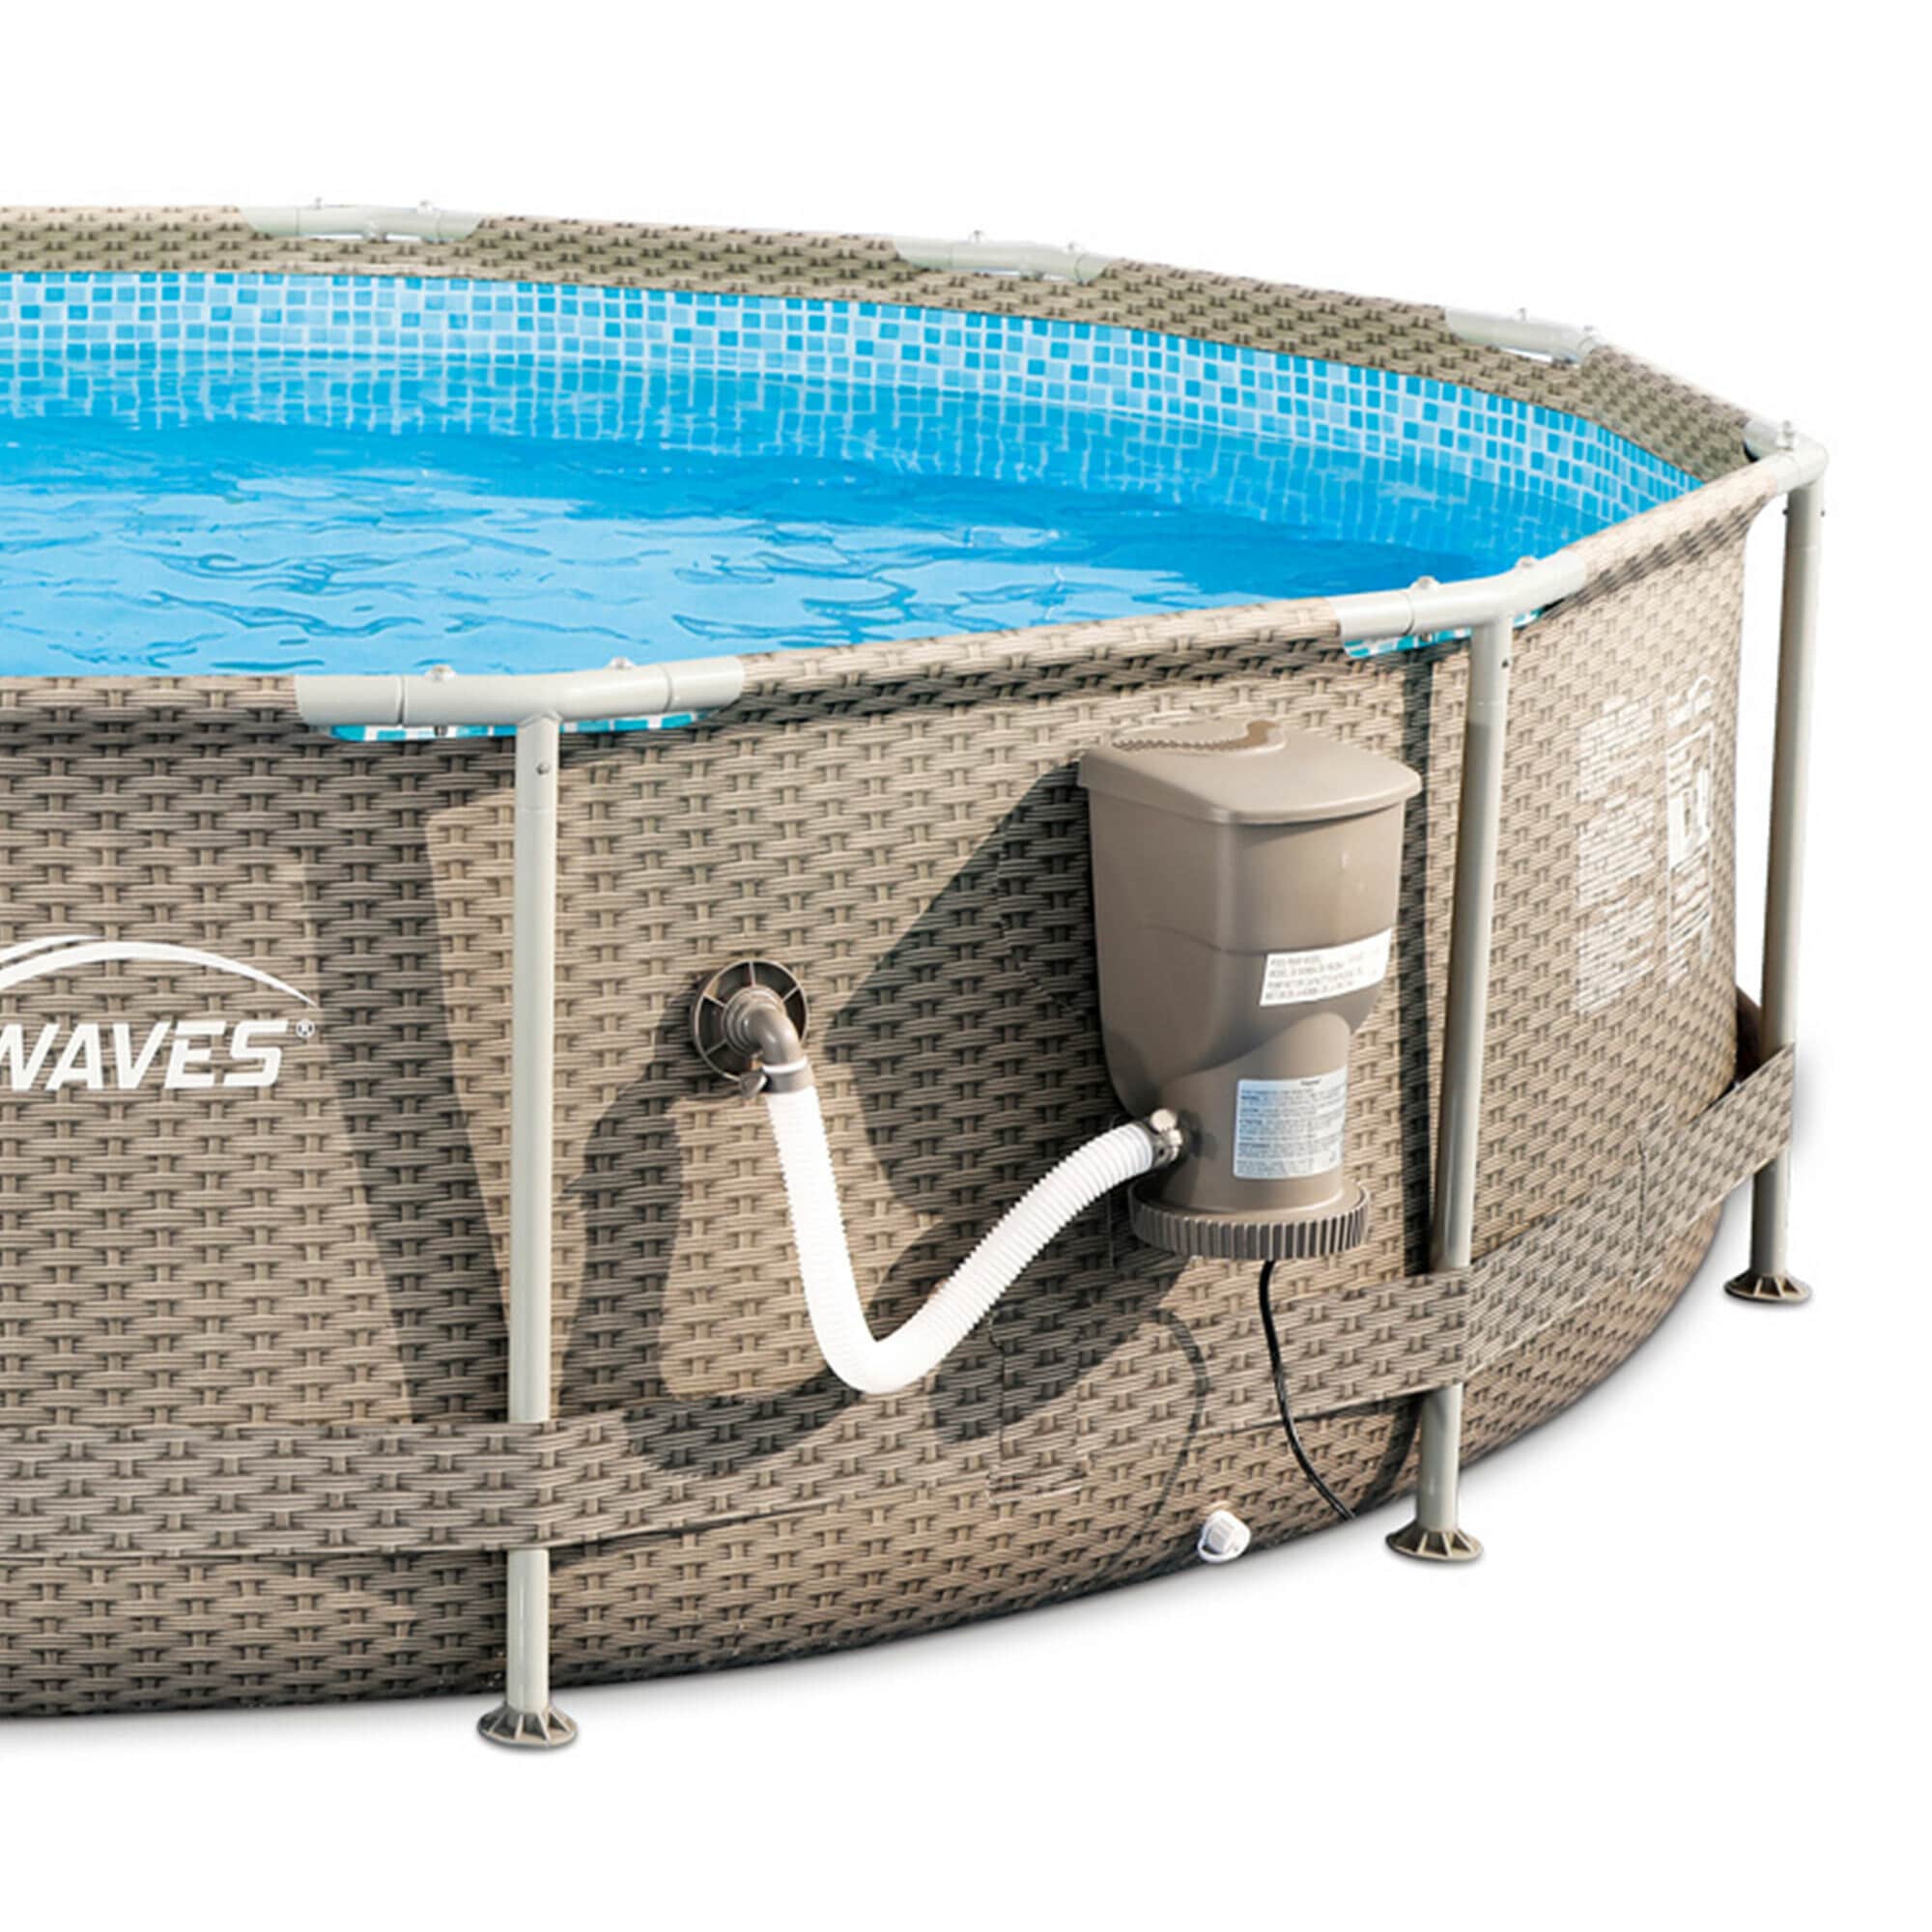 Summer Waves 12-ft x 12-ft x 30-in Metal Frame Round Above-Ground Pool with  Filter Pump at